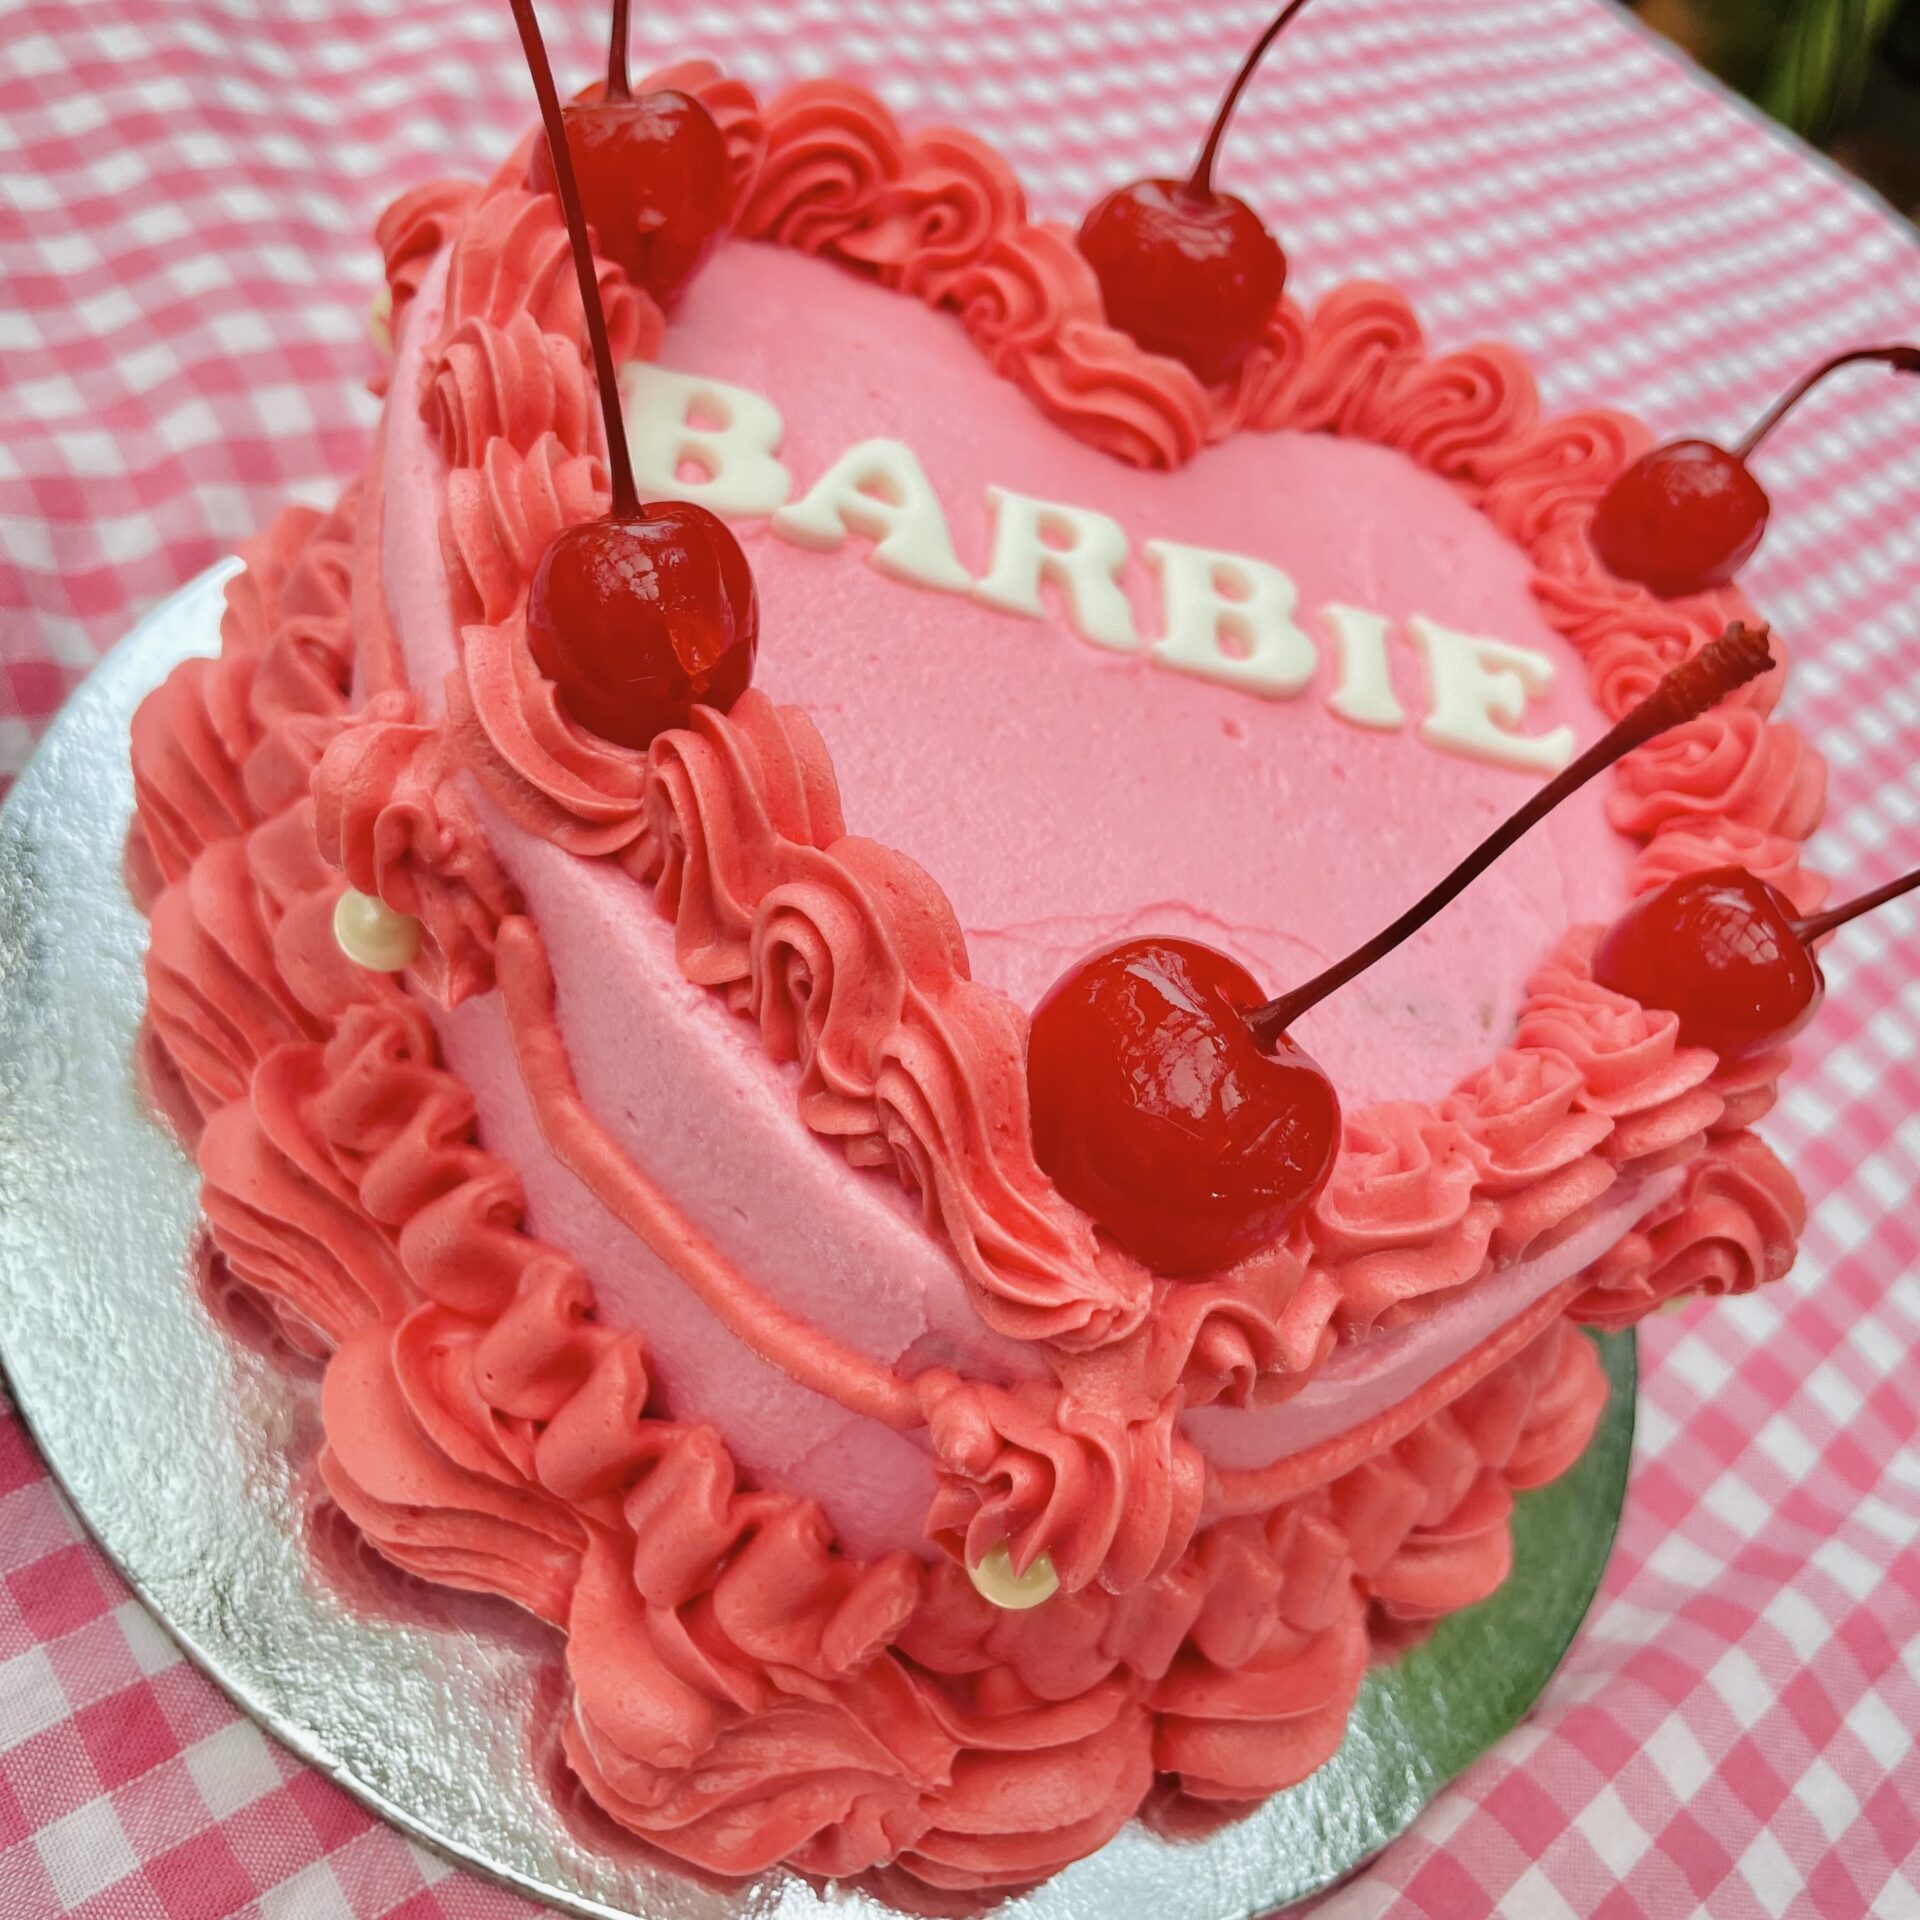 Vintage Heart Cake | Charly's Bakery